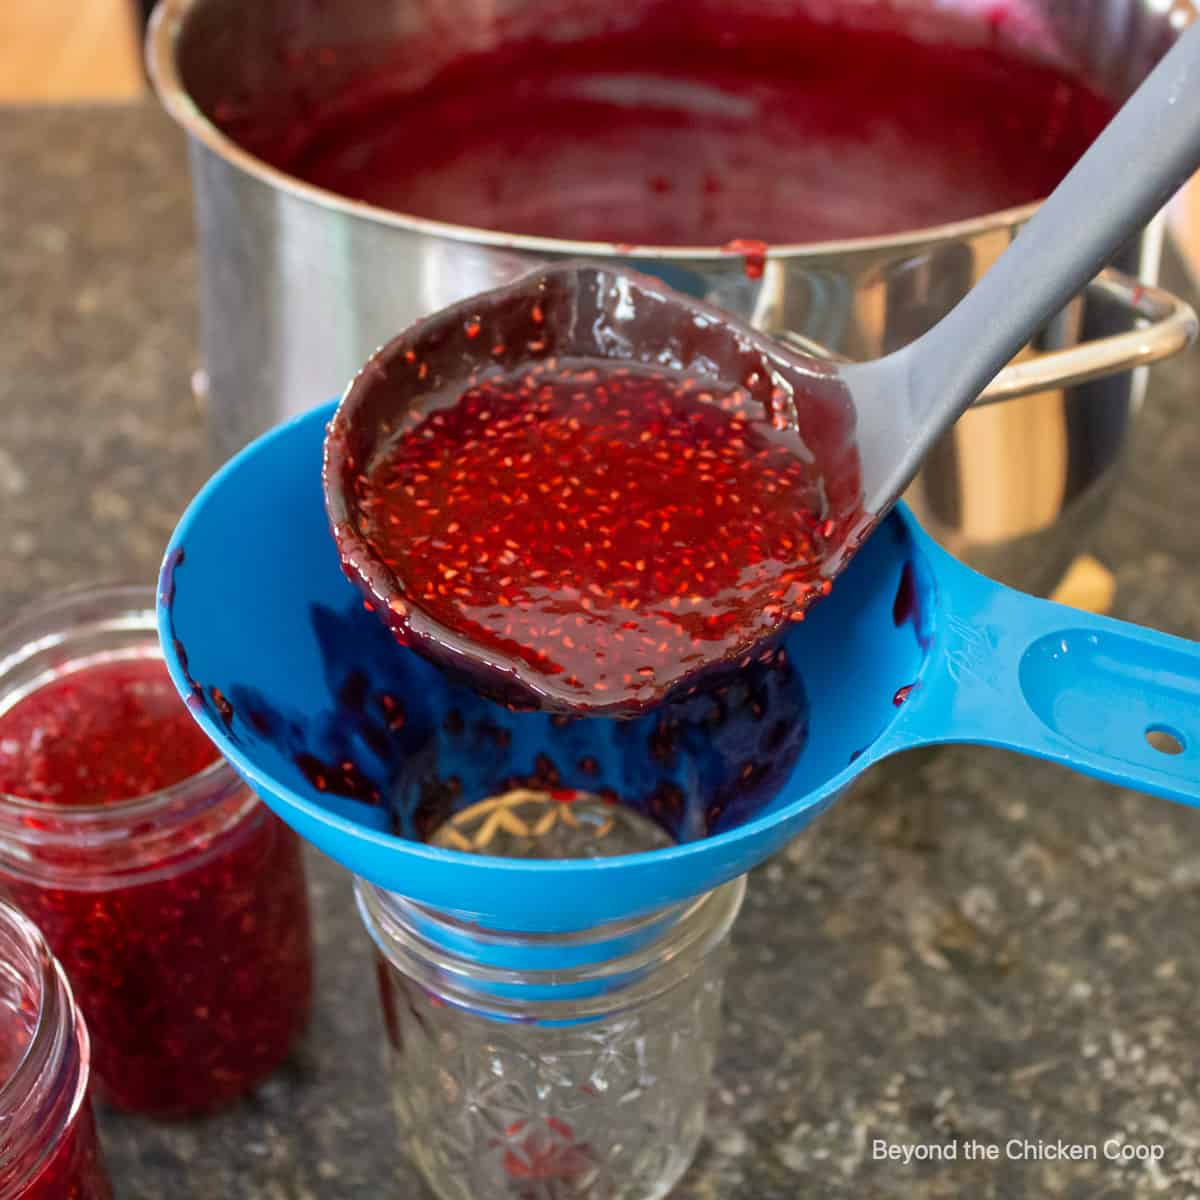 Pouring jam into canning jars using a blue funnel.